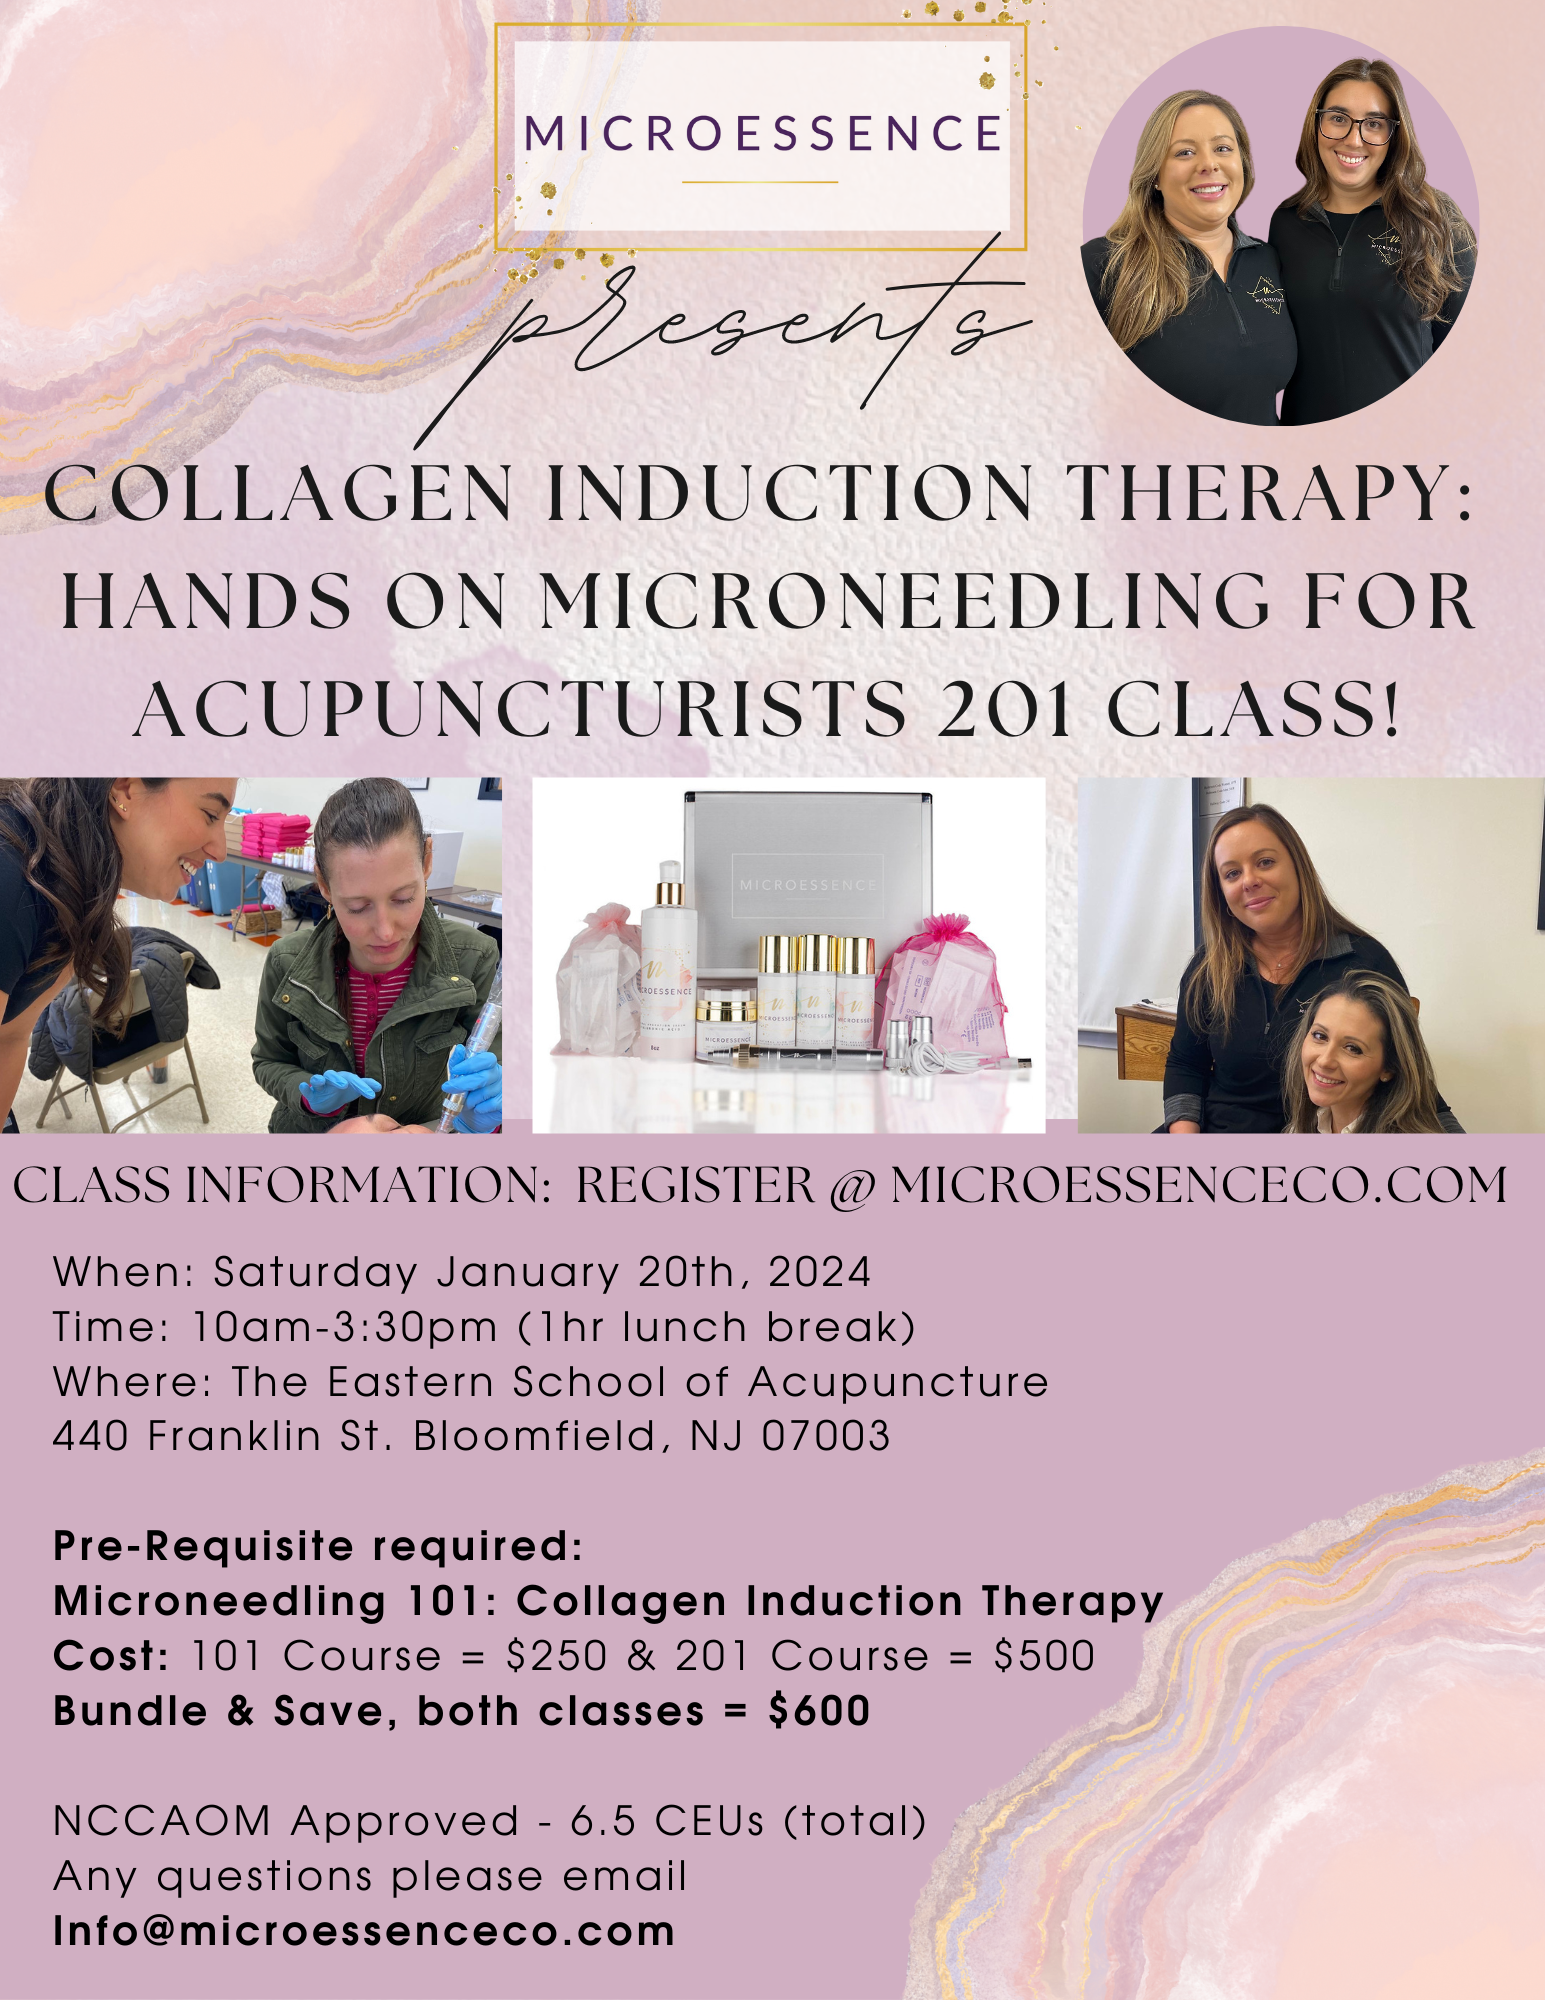 Collagen Induction Therapy Hands On Microneedling for Acupuncturists 201